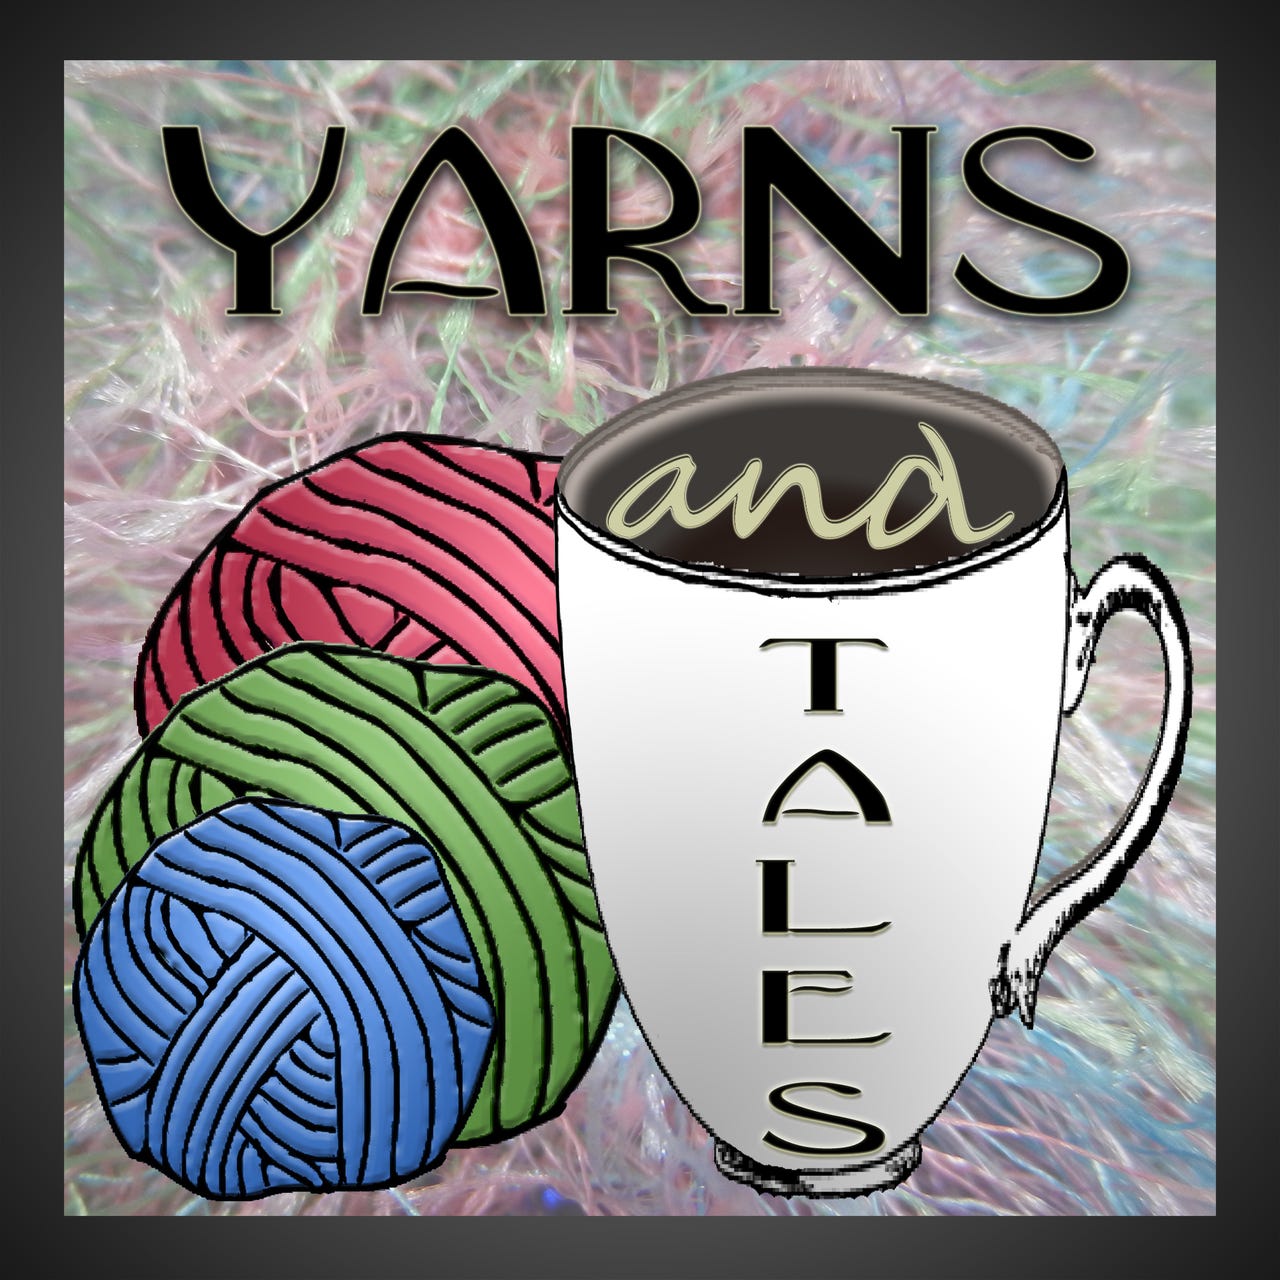 Episode 110: Yarns and Tales: Plans and Potholes